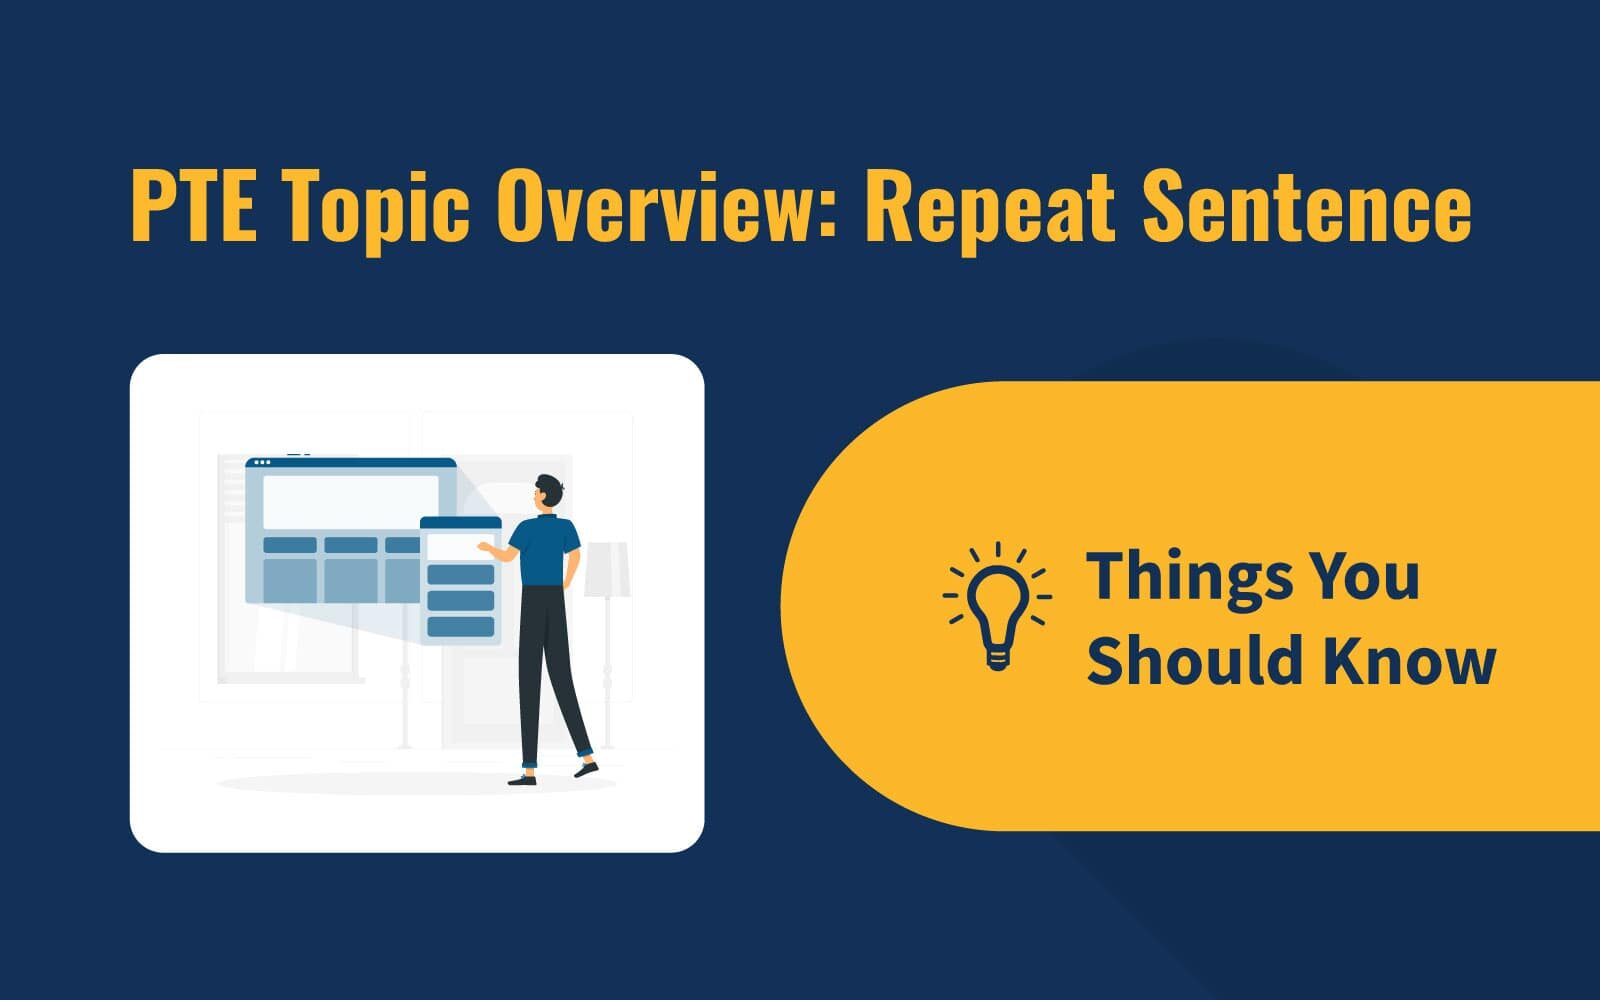 PTE Topic Overview: Repeat Sentence image